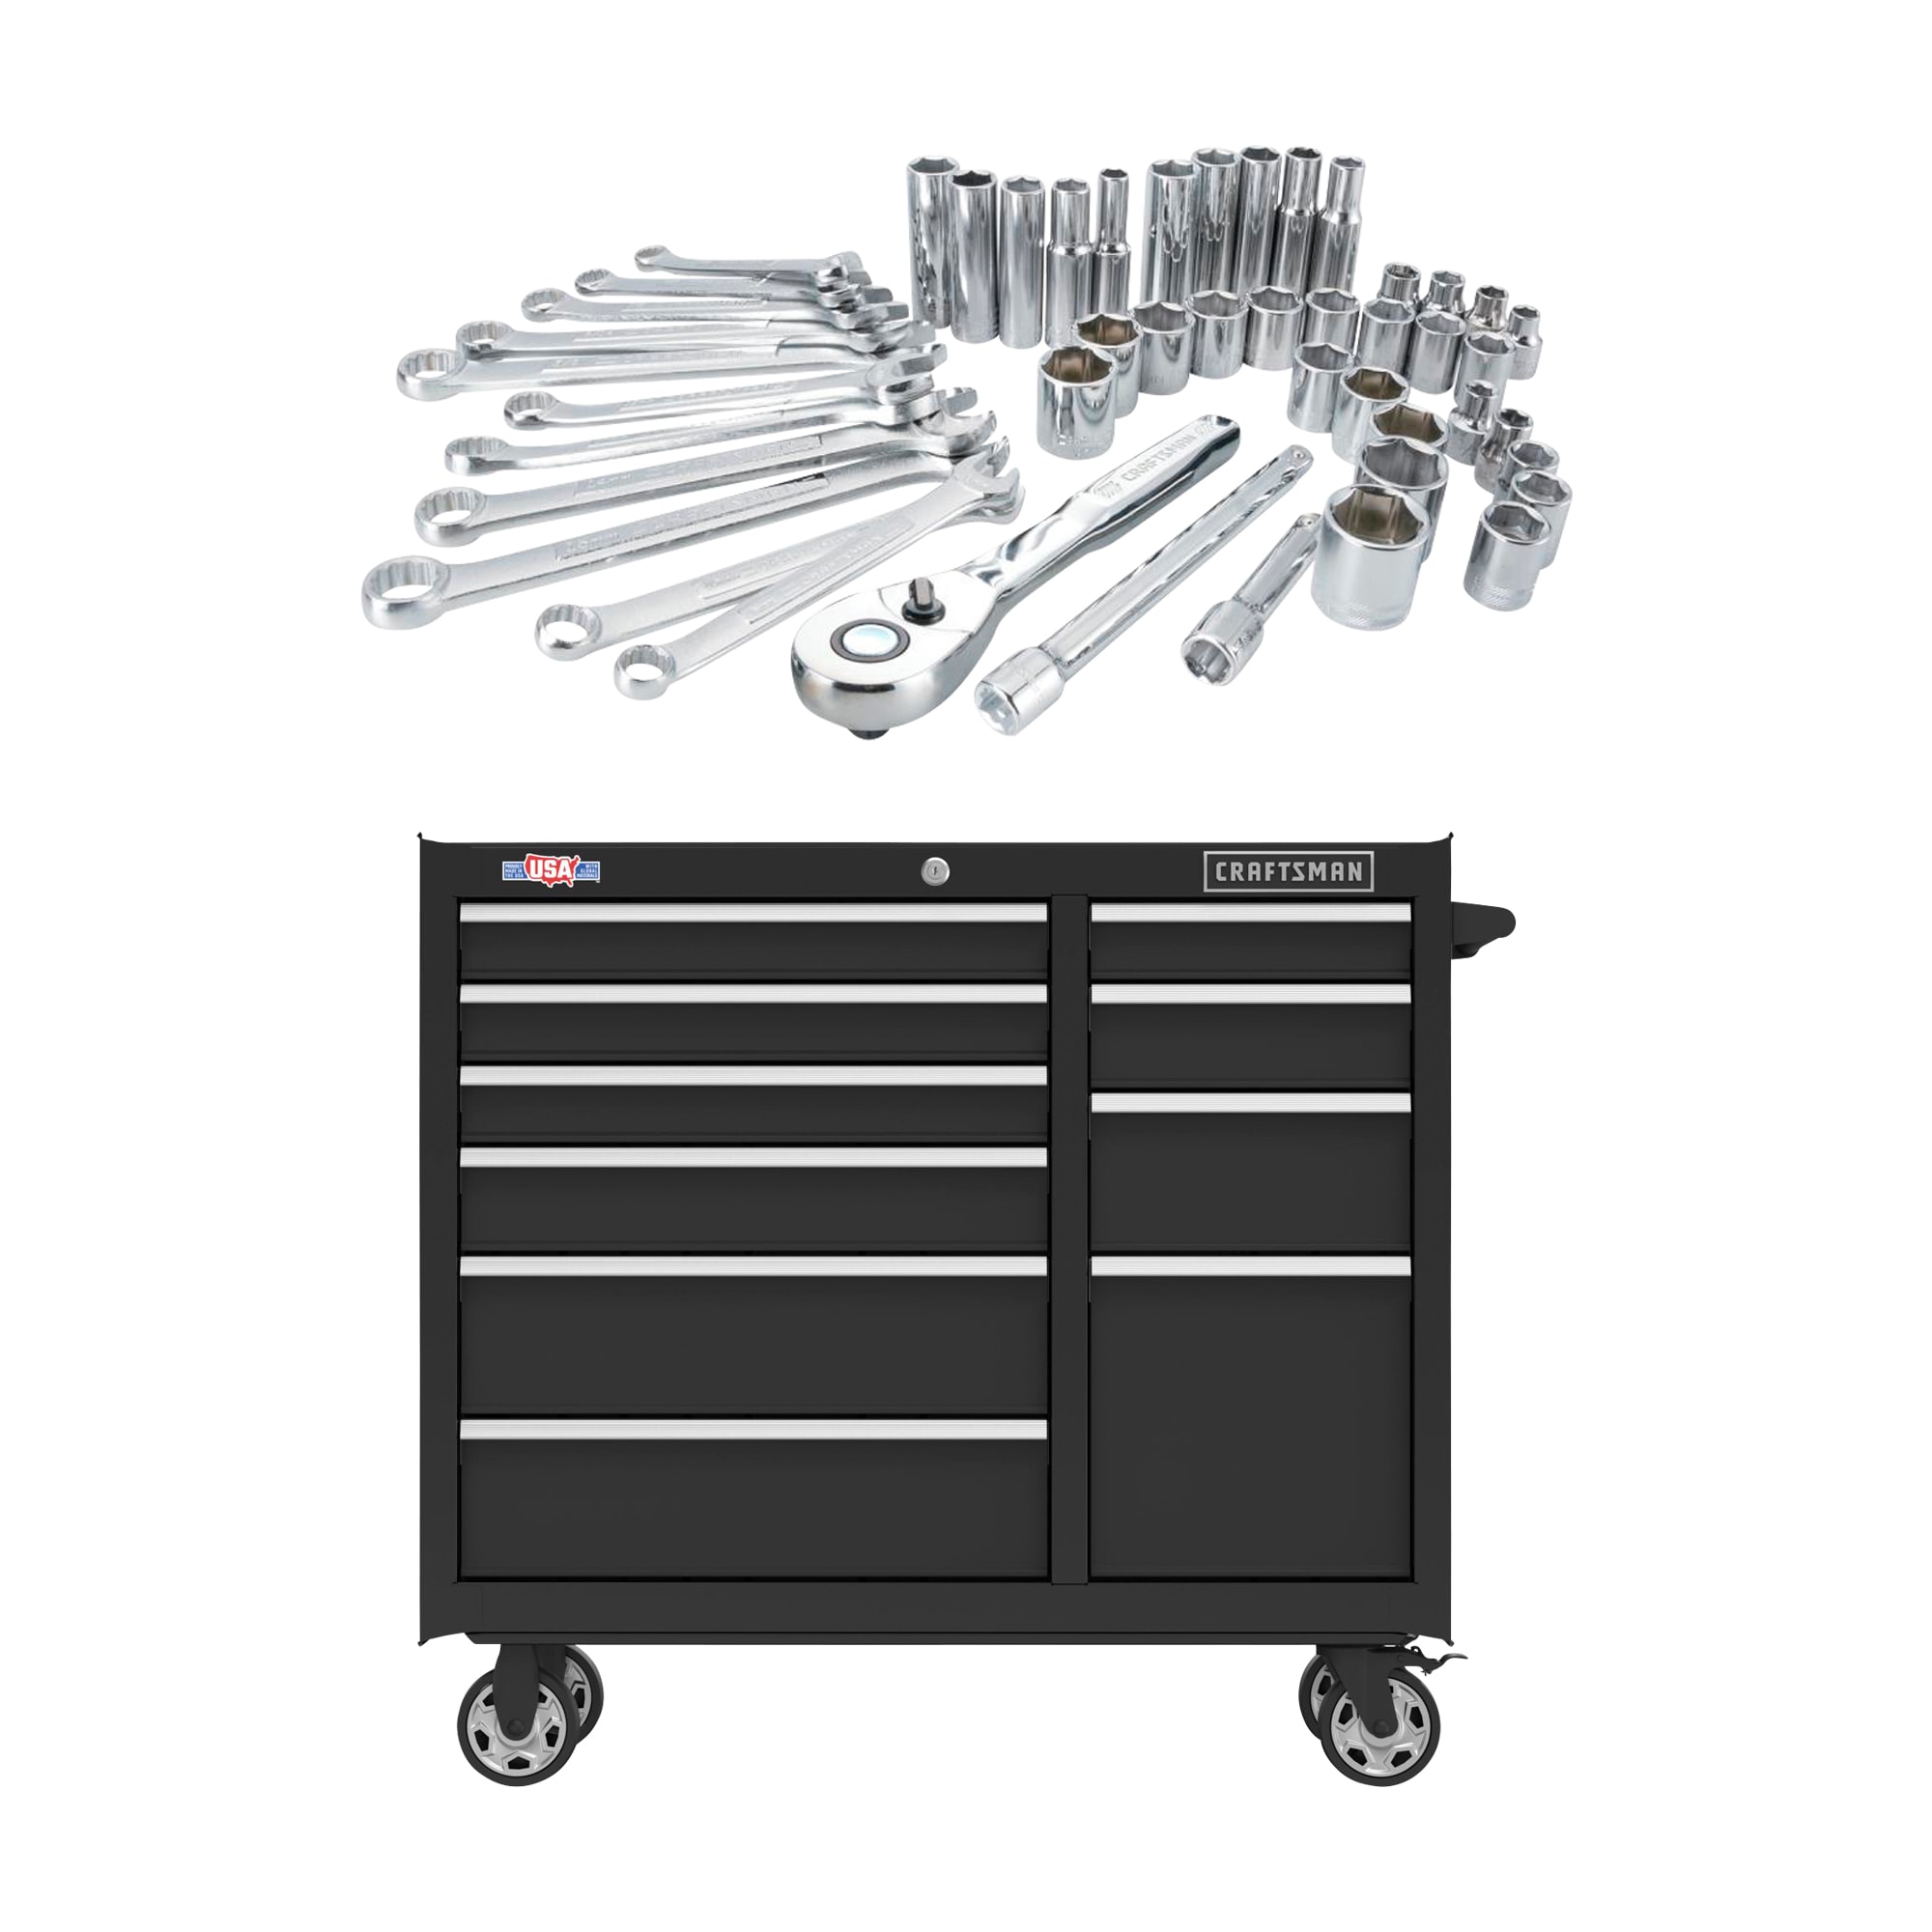 CRAFTSMAN 2000 Series 41-in W x 37.5-in H 10-Drawer Steel Rolling Tool Cabinet (Black) & 47-Piece Standard (SAE) and Metric Combination Polished